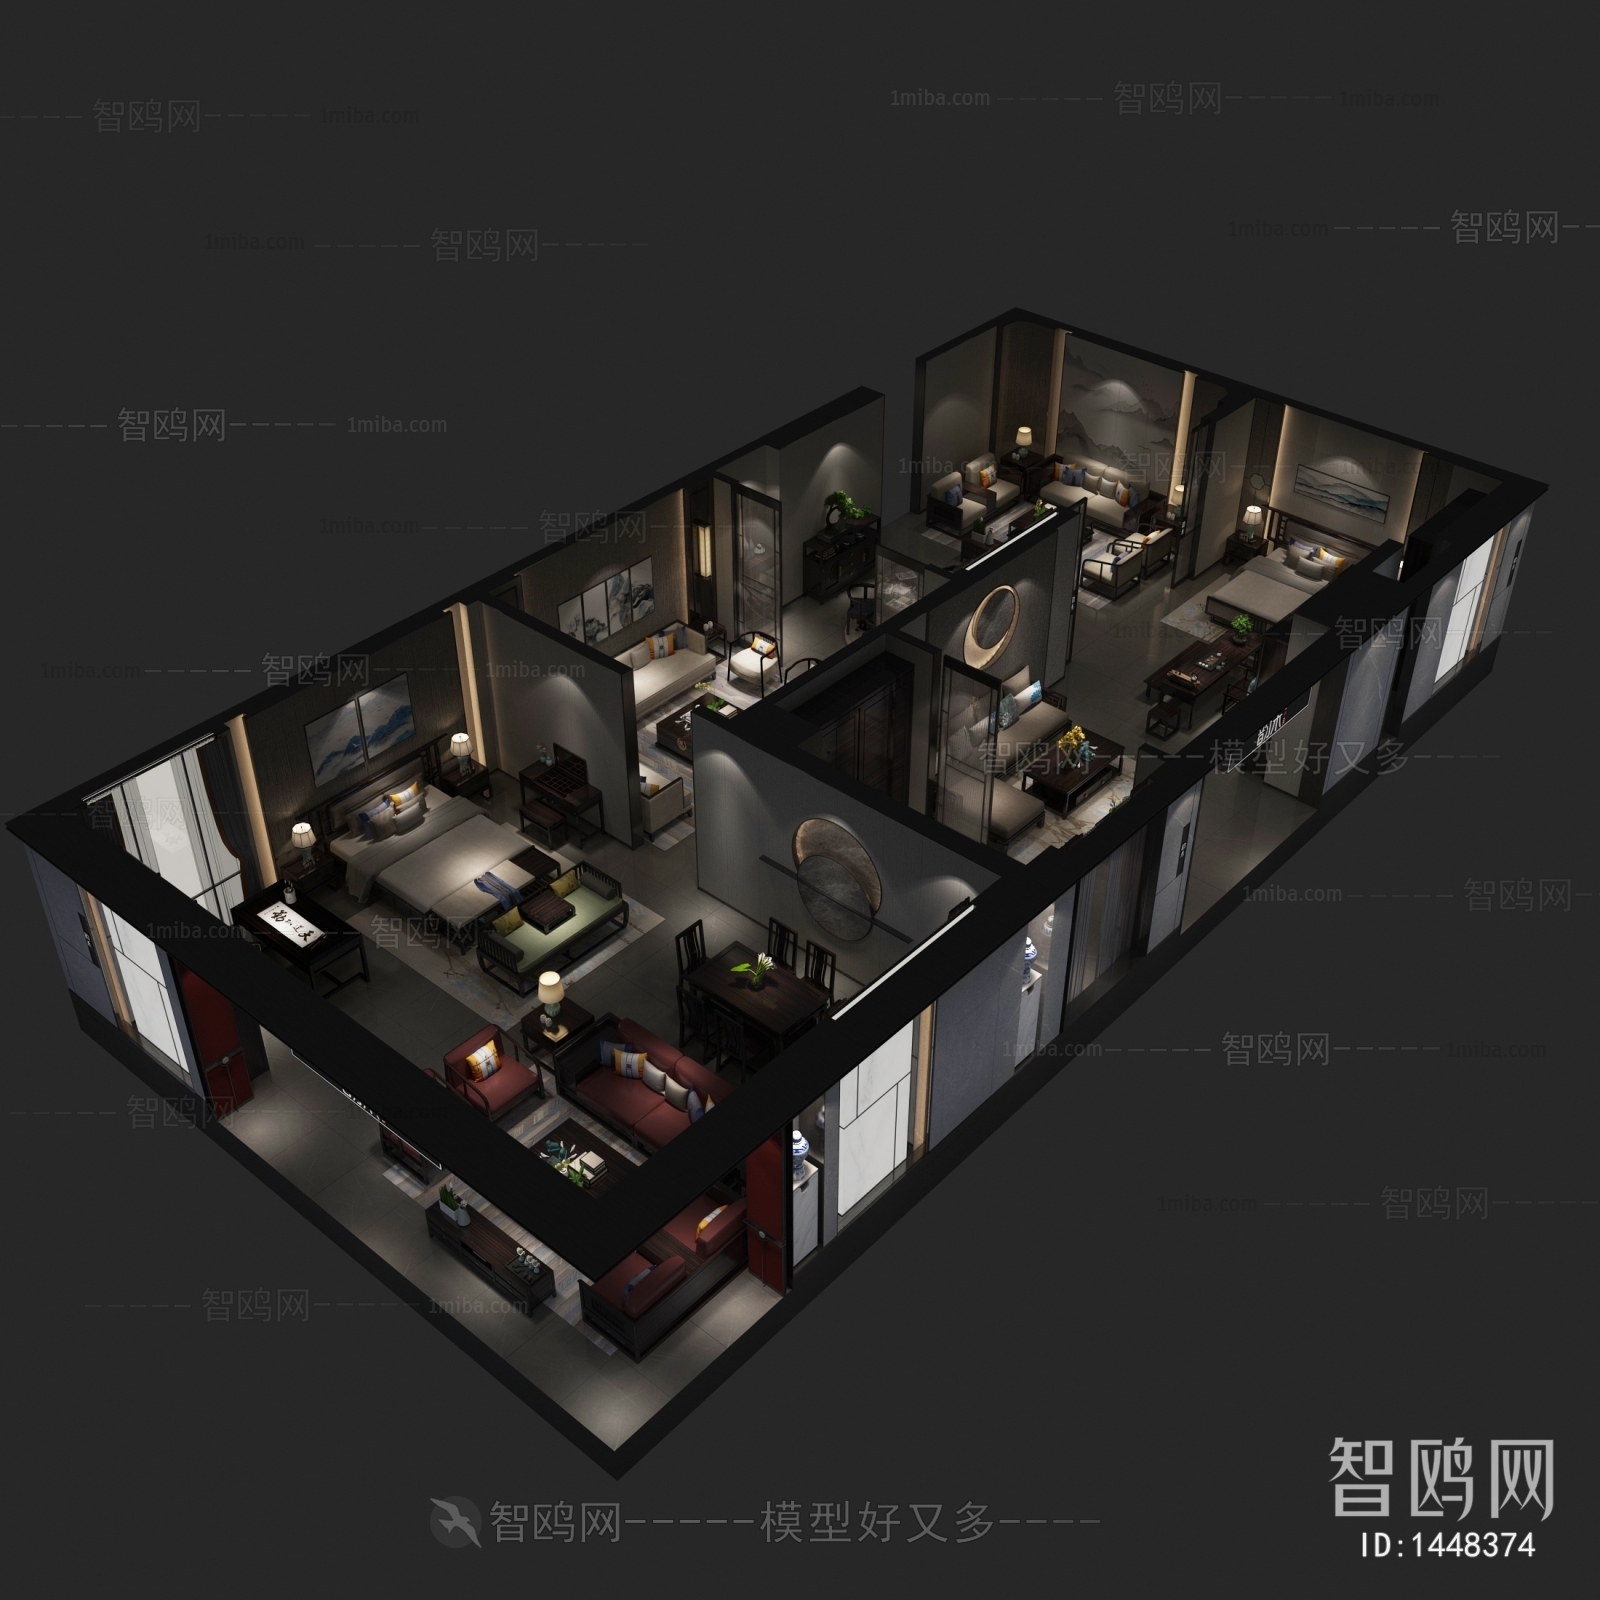 New Chinese Style Furniture Shop